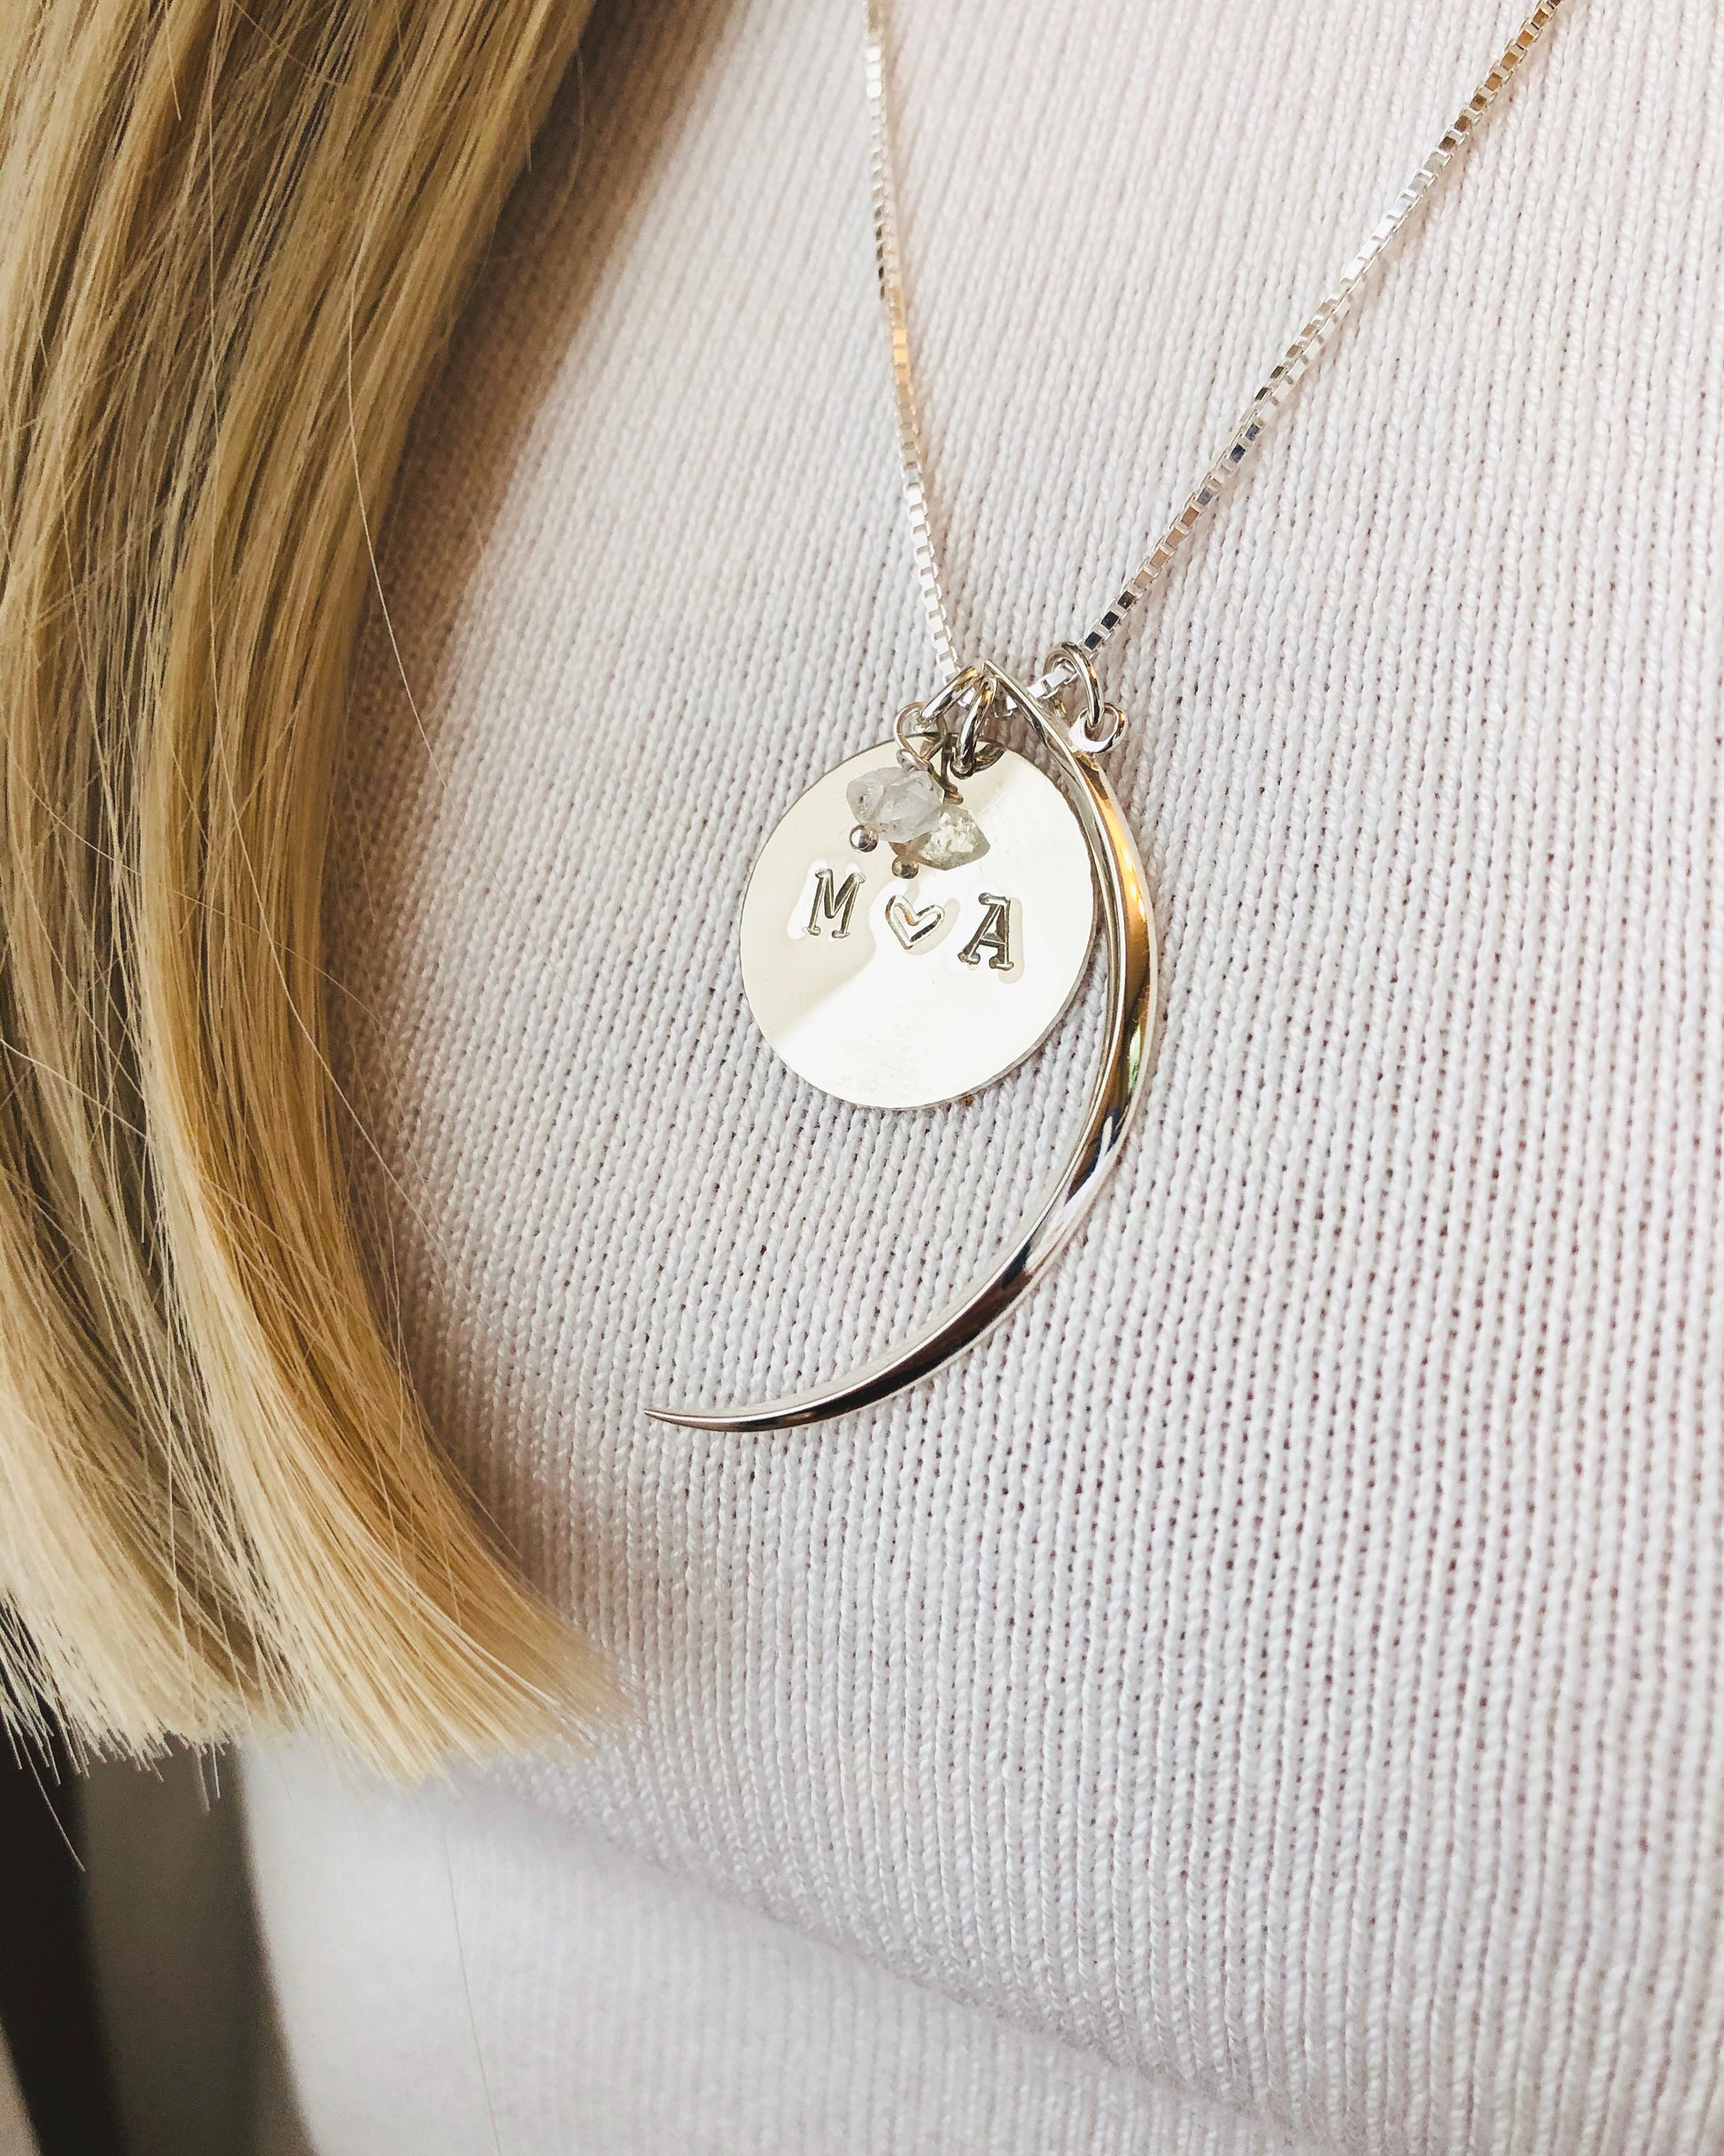 Eclipse Moon Coin Necklace, Coin Necklace, Celestial Jewelry, Moon Necklace, Birthstone Coin Jewelry, Personalized Gift,Sun and Moon Jewelry